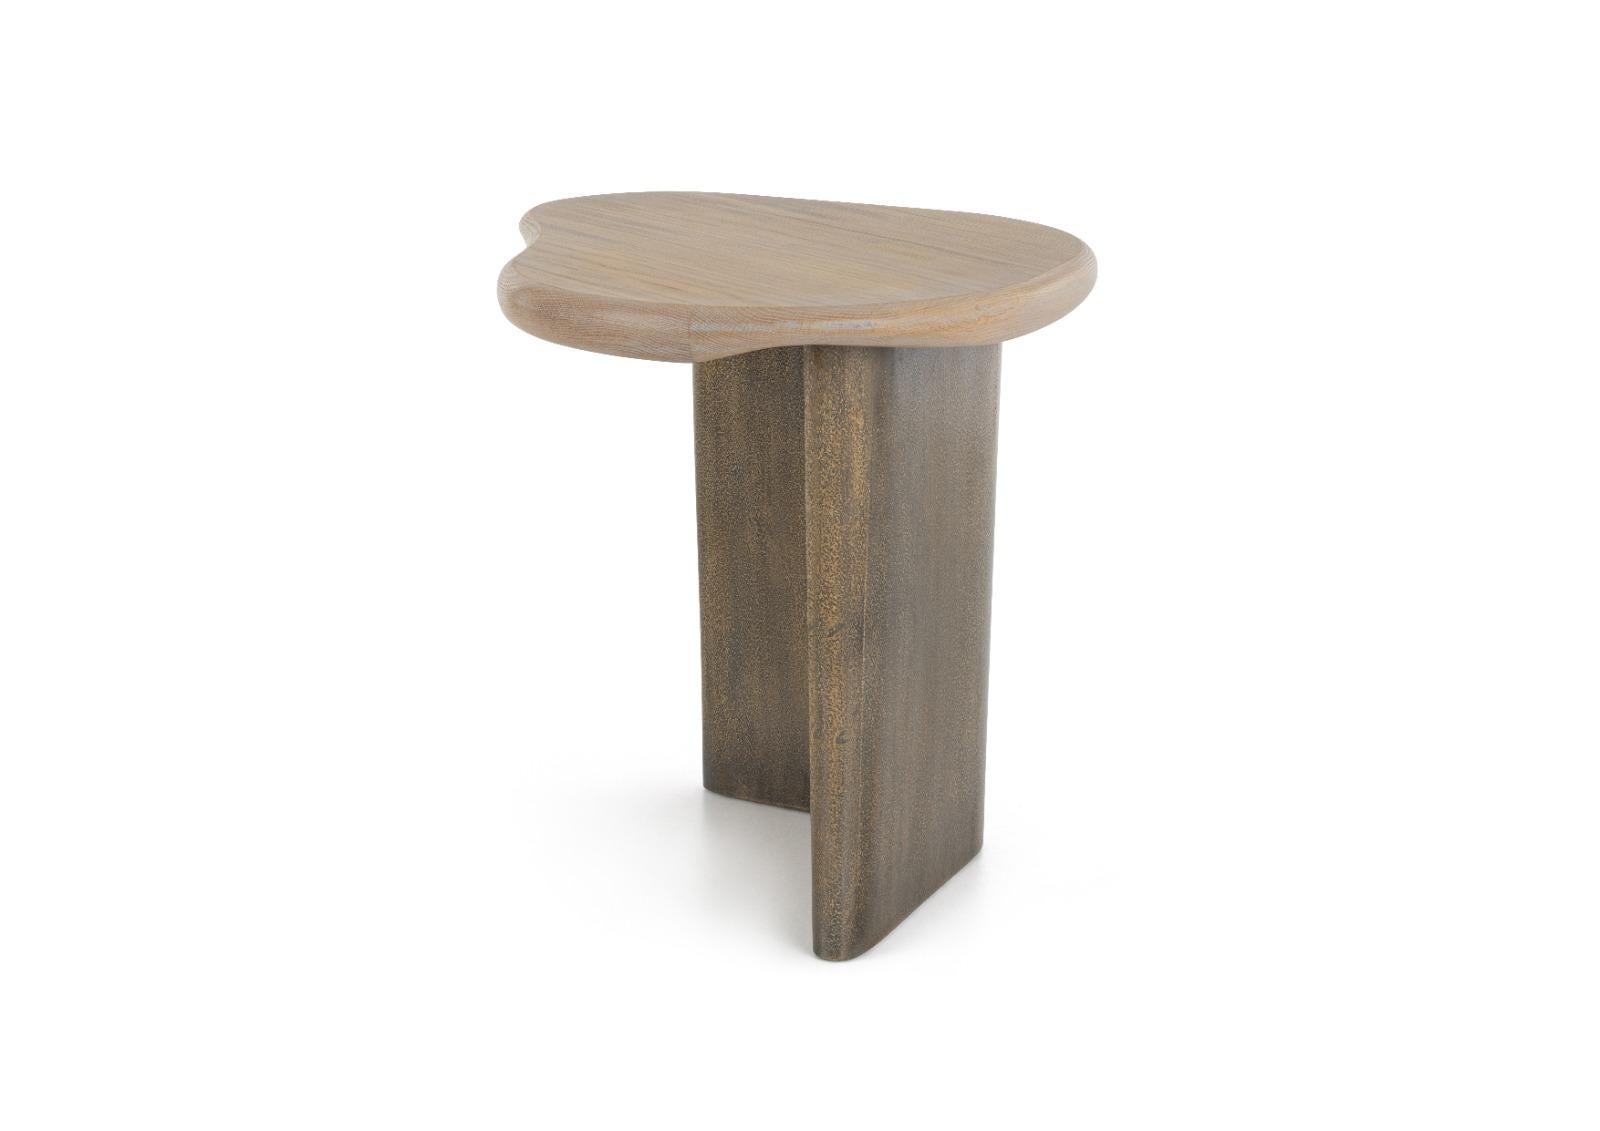 Ocean, a side table inspired by the ever-changing beauty of ocean waves. Its fluid, amorphous shape captures a sense of organic beauty, making it a simple yet captivating statement for any space. The table's top, constructed from solid oak, adds a